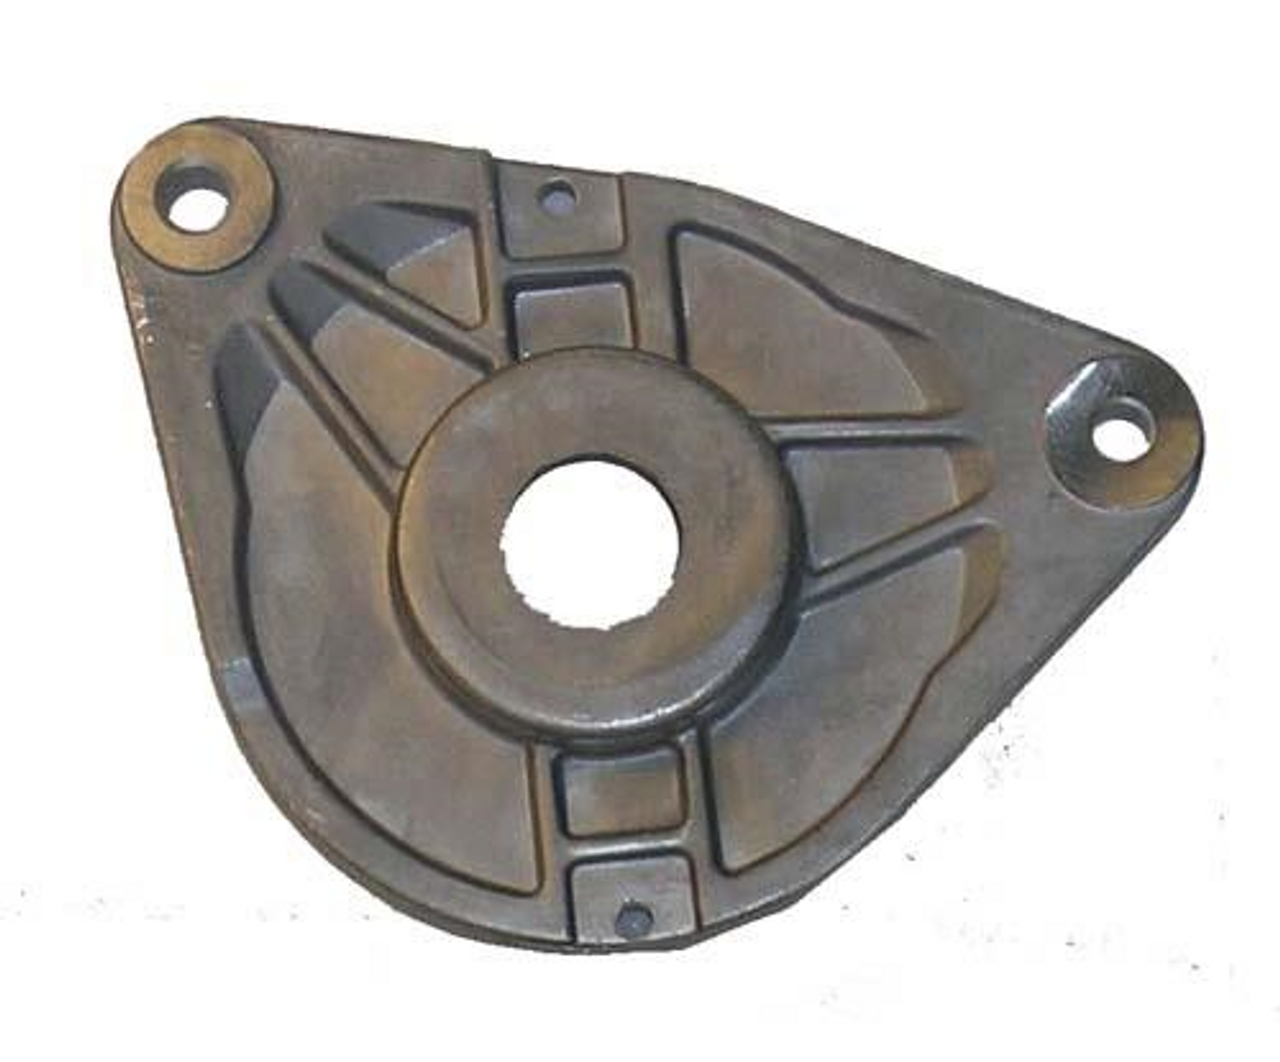 Club Car Gas Drive End Plate for Starter Generator (Years 2001-Up), 7907, 1028446-01